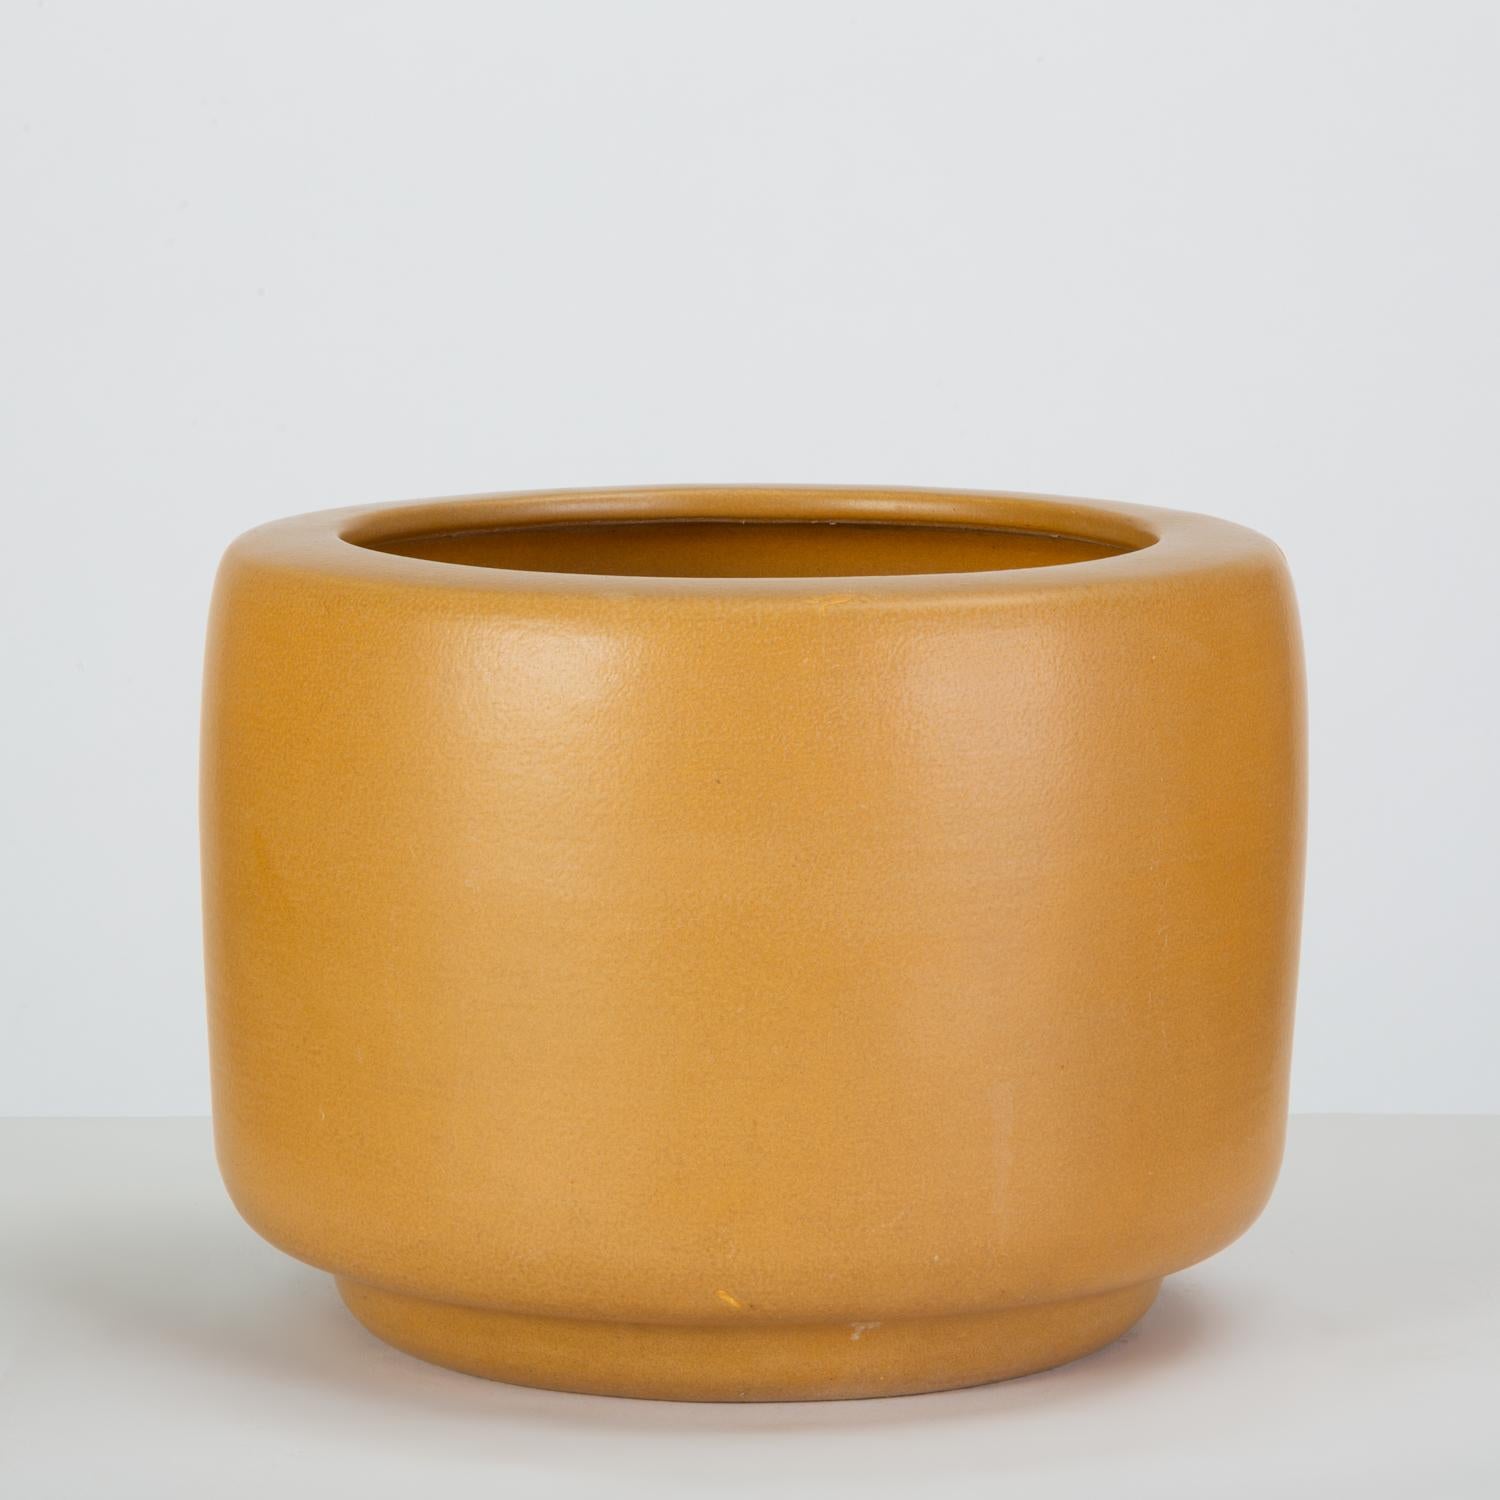 Glazed CP-13 Tire Planter by John Follis for Architectural Pottery in Yellow Glaze